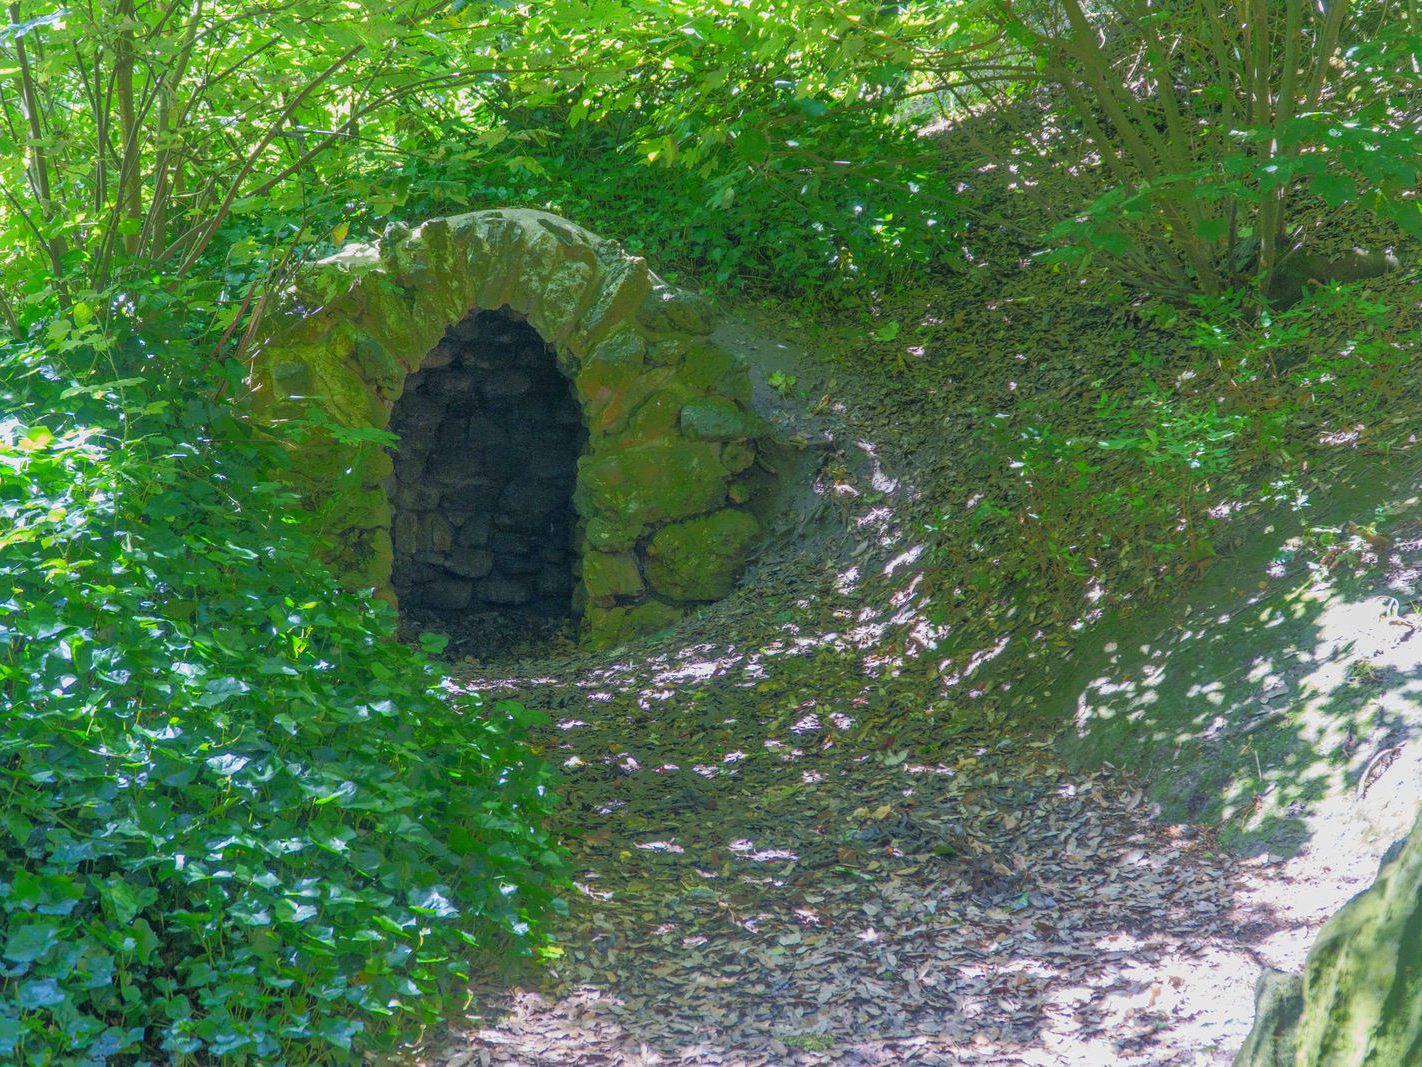 ST ANN'S WELL AT ST ANNE'S PARK [A HOLY WELL NOW DESCRIBED AS A WISHING WELL] 005